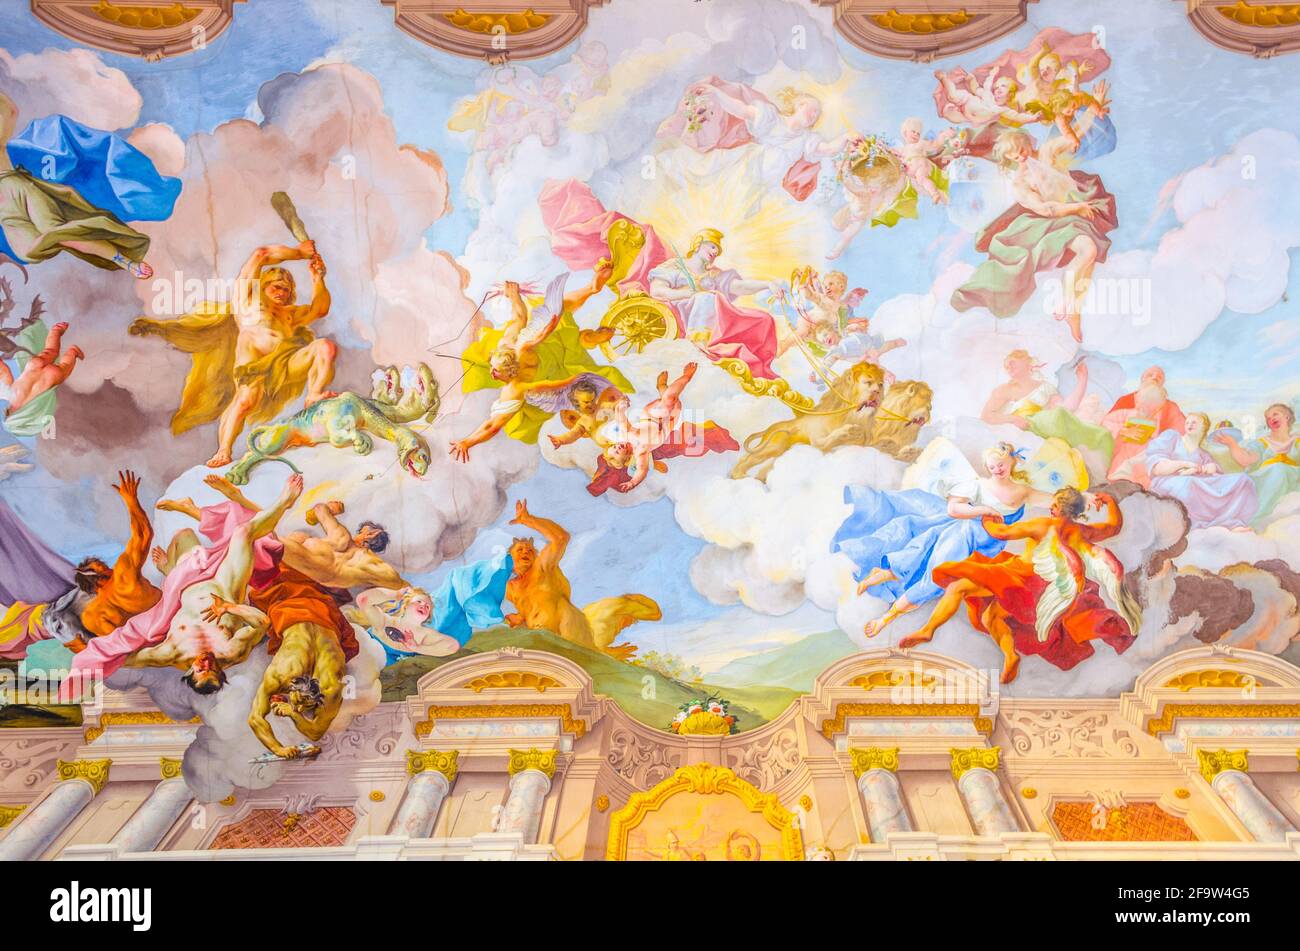 MELK, AUSTRIA, MAY 16, 2015: ceiling painting in Melk Abbey in Melk, Austria. Abbey Church is considered one of the most beautiful in Austria, built i Stock Photo